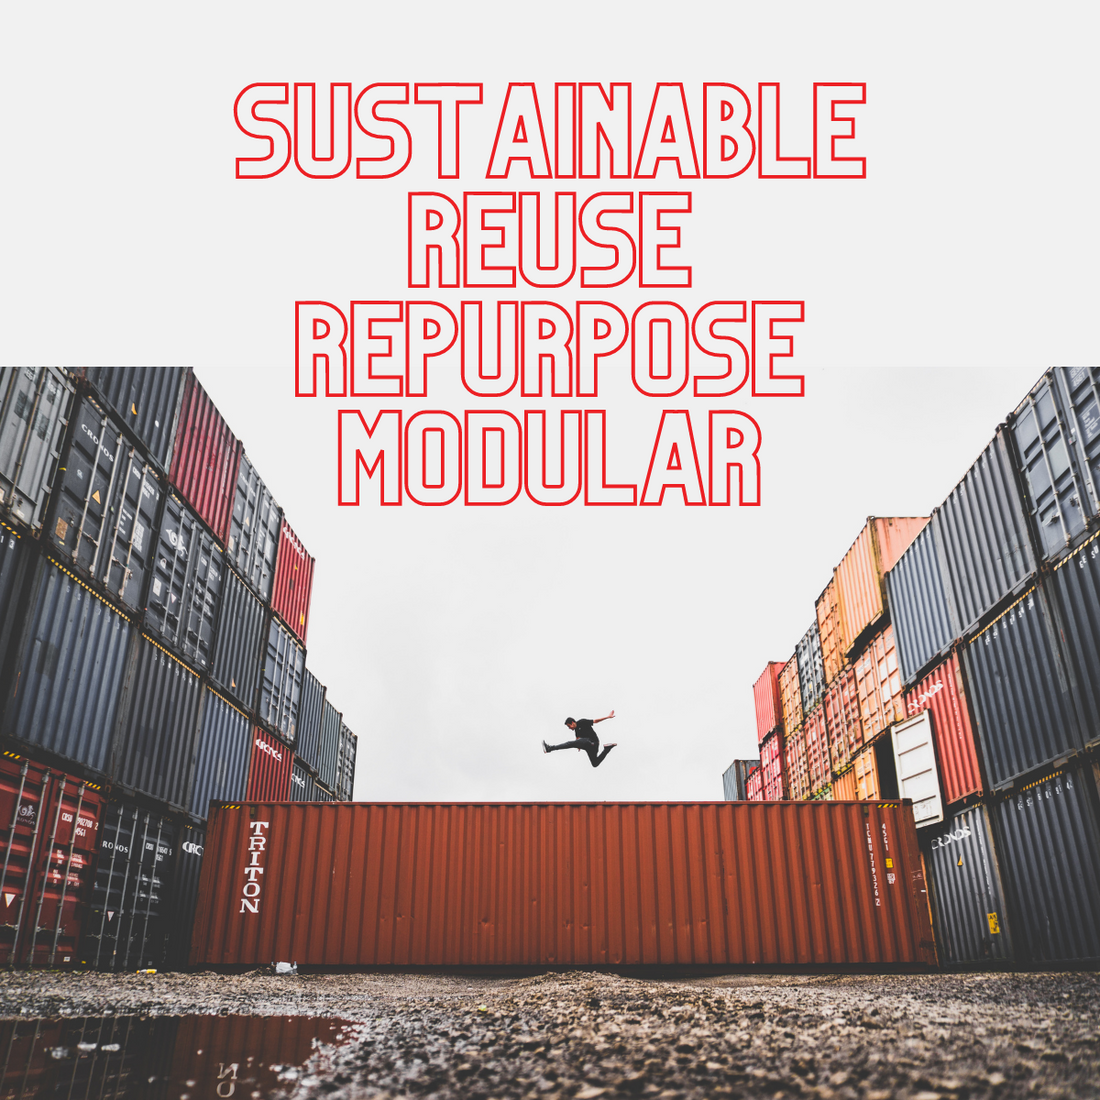 Reuse & Repurpose Shipping Containers